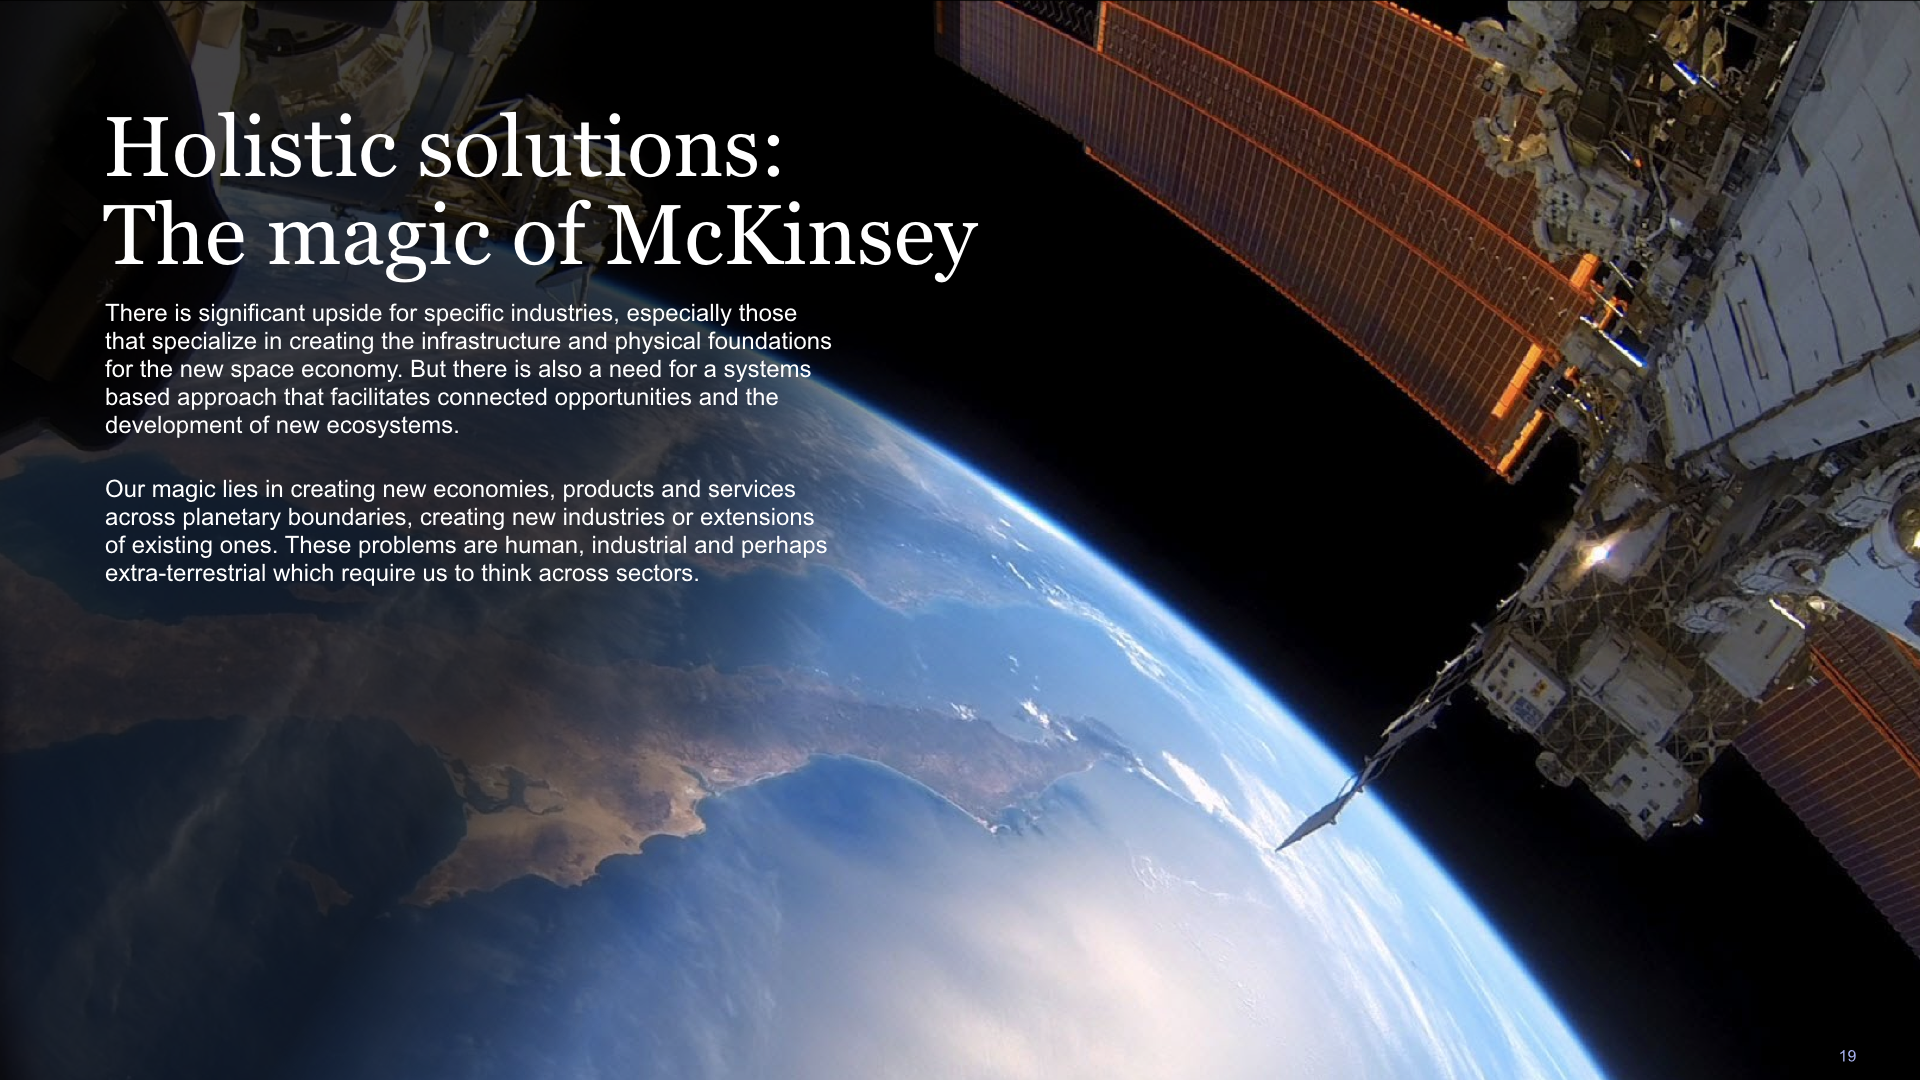 McKinsey_SpaceEconomy2019_MINING_overview_v019.019.png